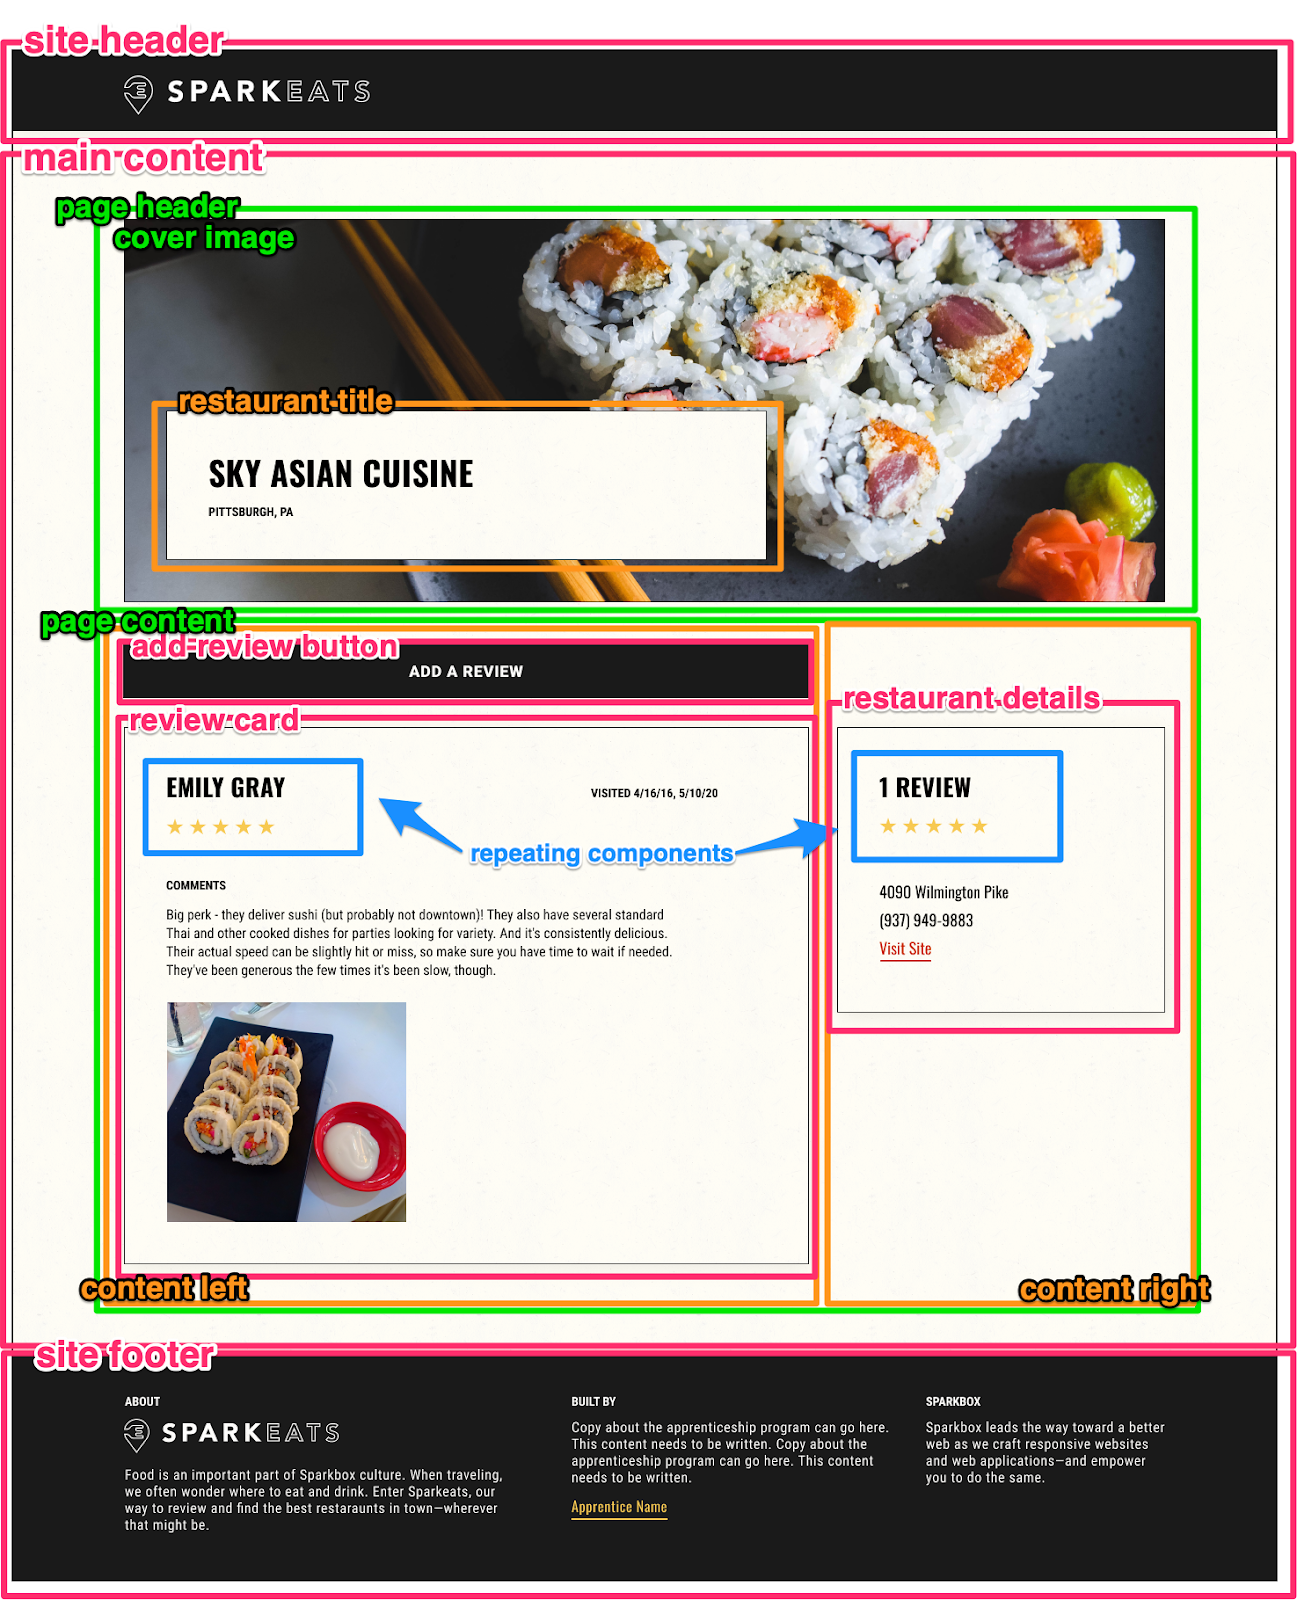 The Sky Asian Cuisine page decomposed into these elements that are each outlined and labelled: site header, main content, page header, cover image, page content, add review button, review card, restaurant details, content left, content right, and site footer.